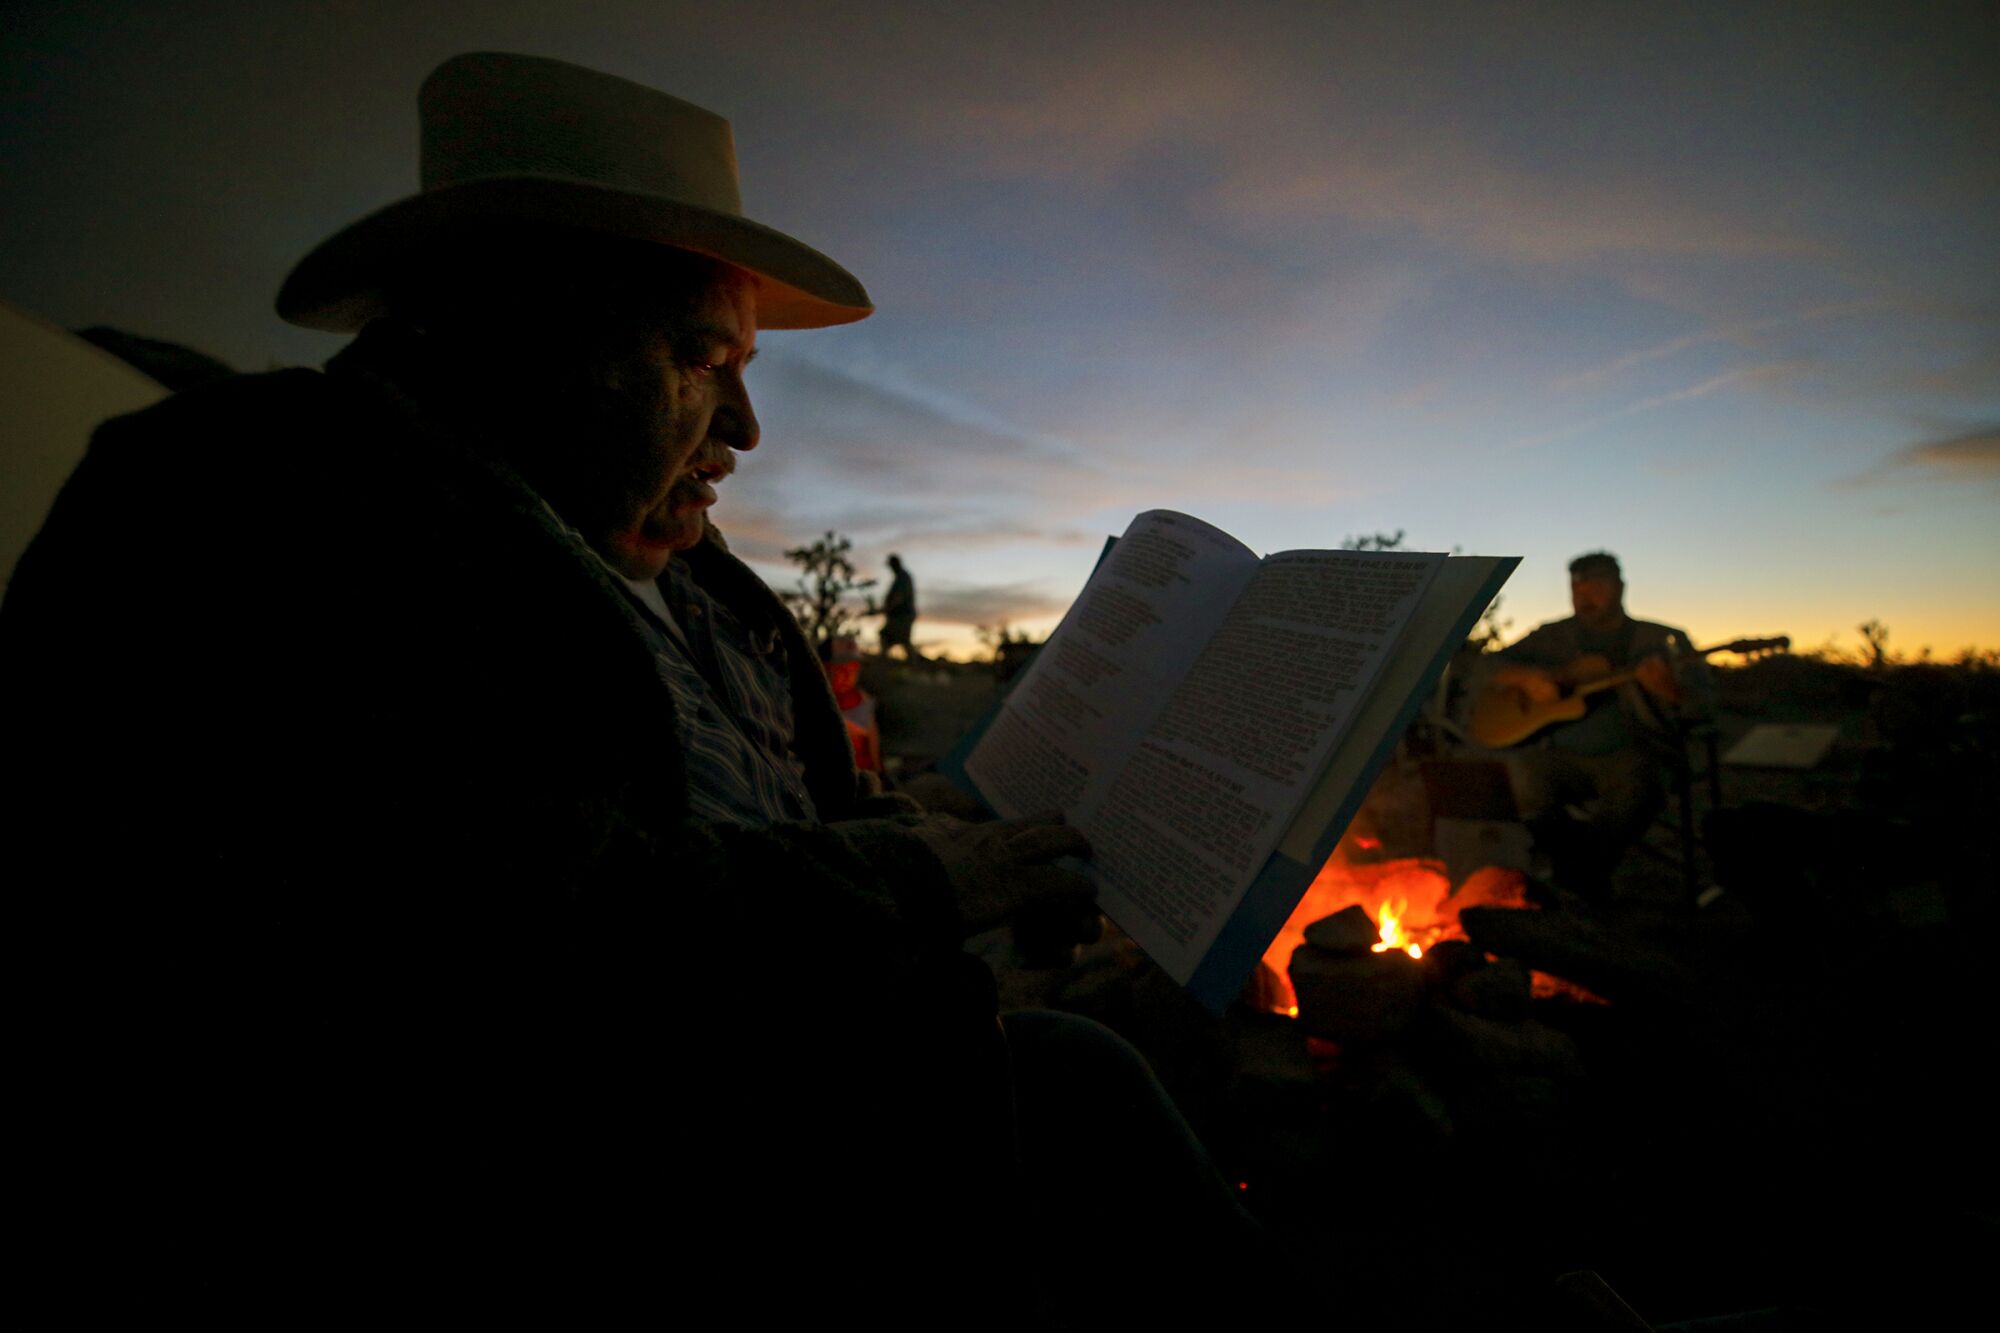 April 3: Home missionary Larry Craig looks at paperwork, sitting near a campfire.